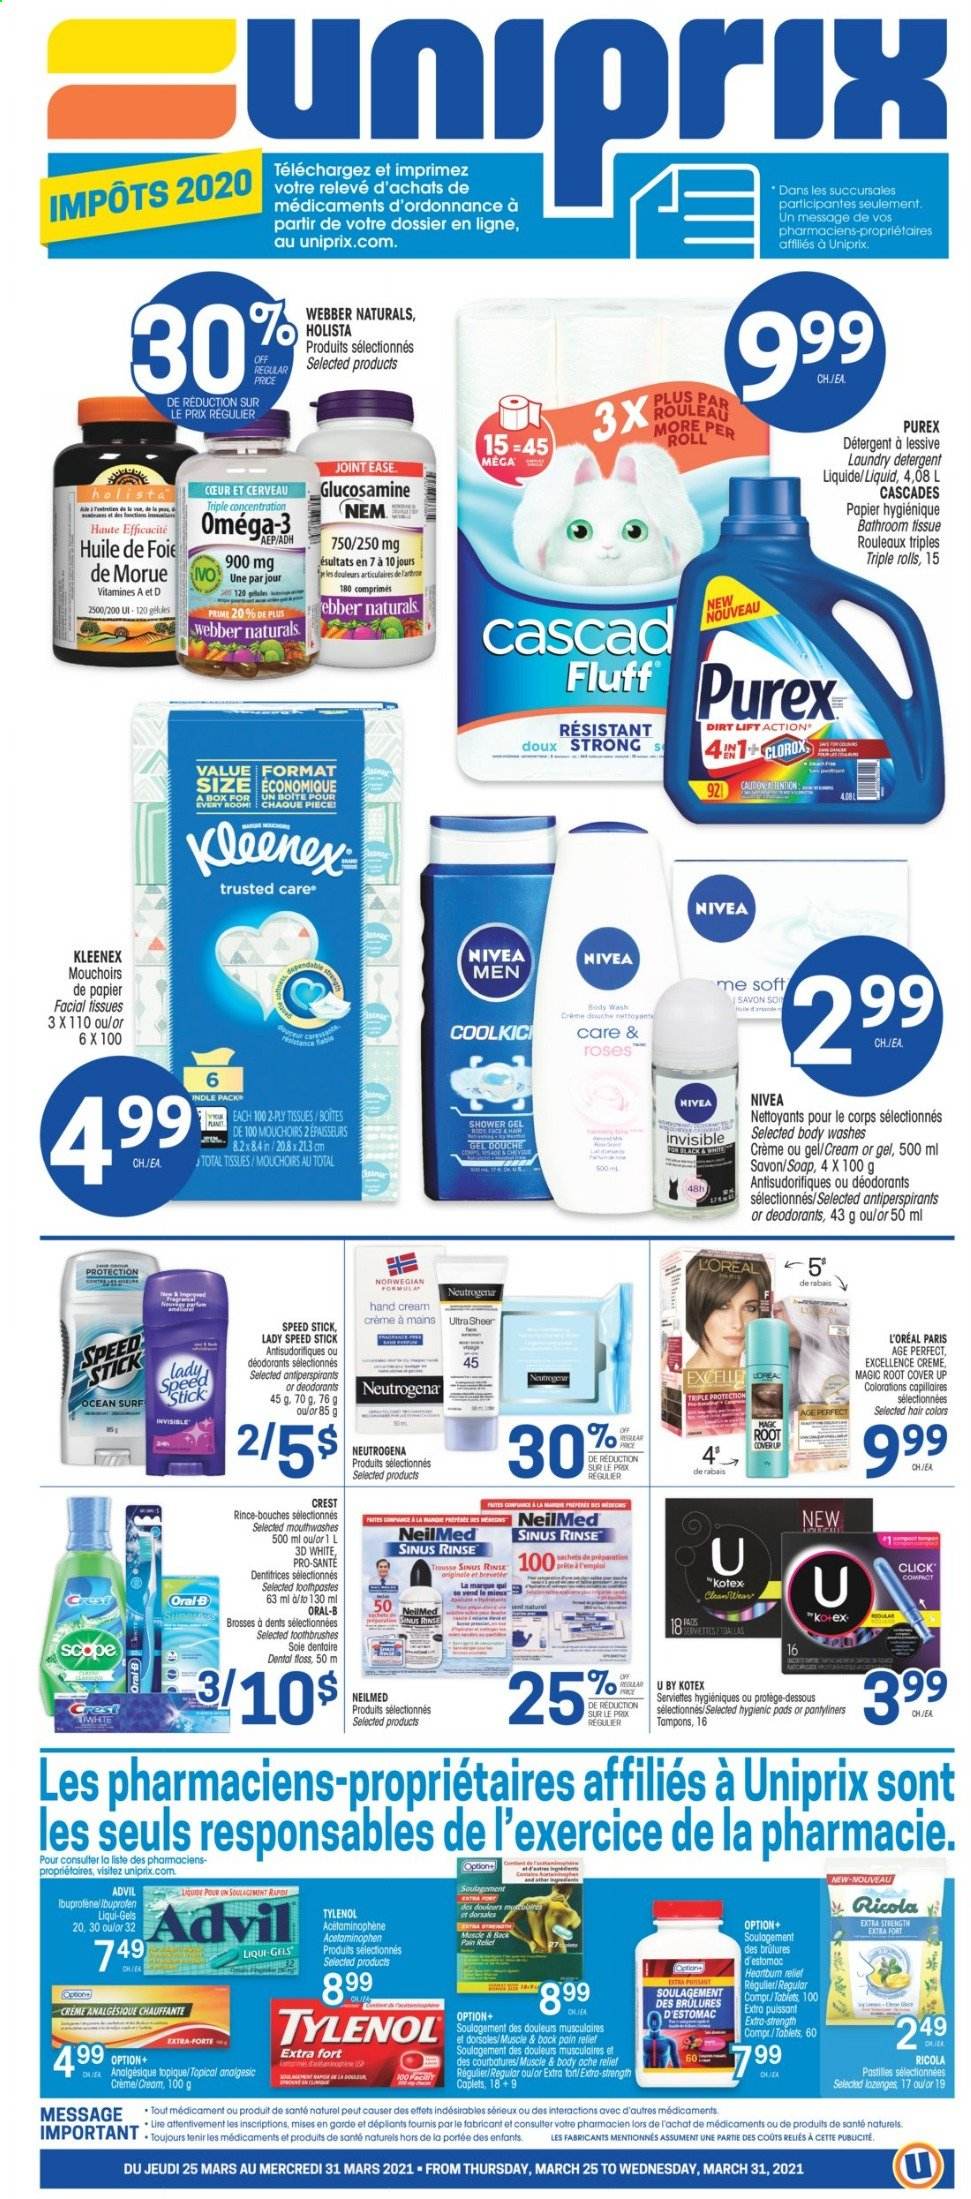 thumbnail - Uniprix Flyer - March 25, 2021 - March 31, 2021 - Sales products - Ricola, Mars, pastilles, Parle, bath tissue, Kleenex, laundry detergent, Purex, body wash, shower gel, soap, Crest, Kotex, pantyliners, tampons, facial tissues, L’Oréal, hand cream, Speed Stick, pain relief, glucosamine, Tylenol, Omega-3, Advil Rapid, Neutrogena, Nivea, Oral-B, deodorant. Page 1.